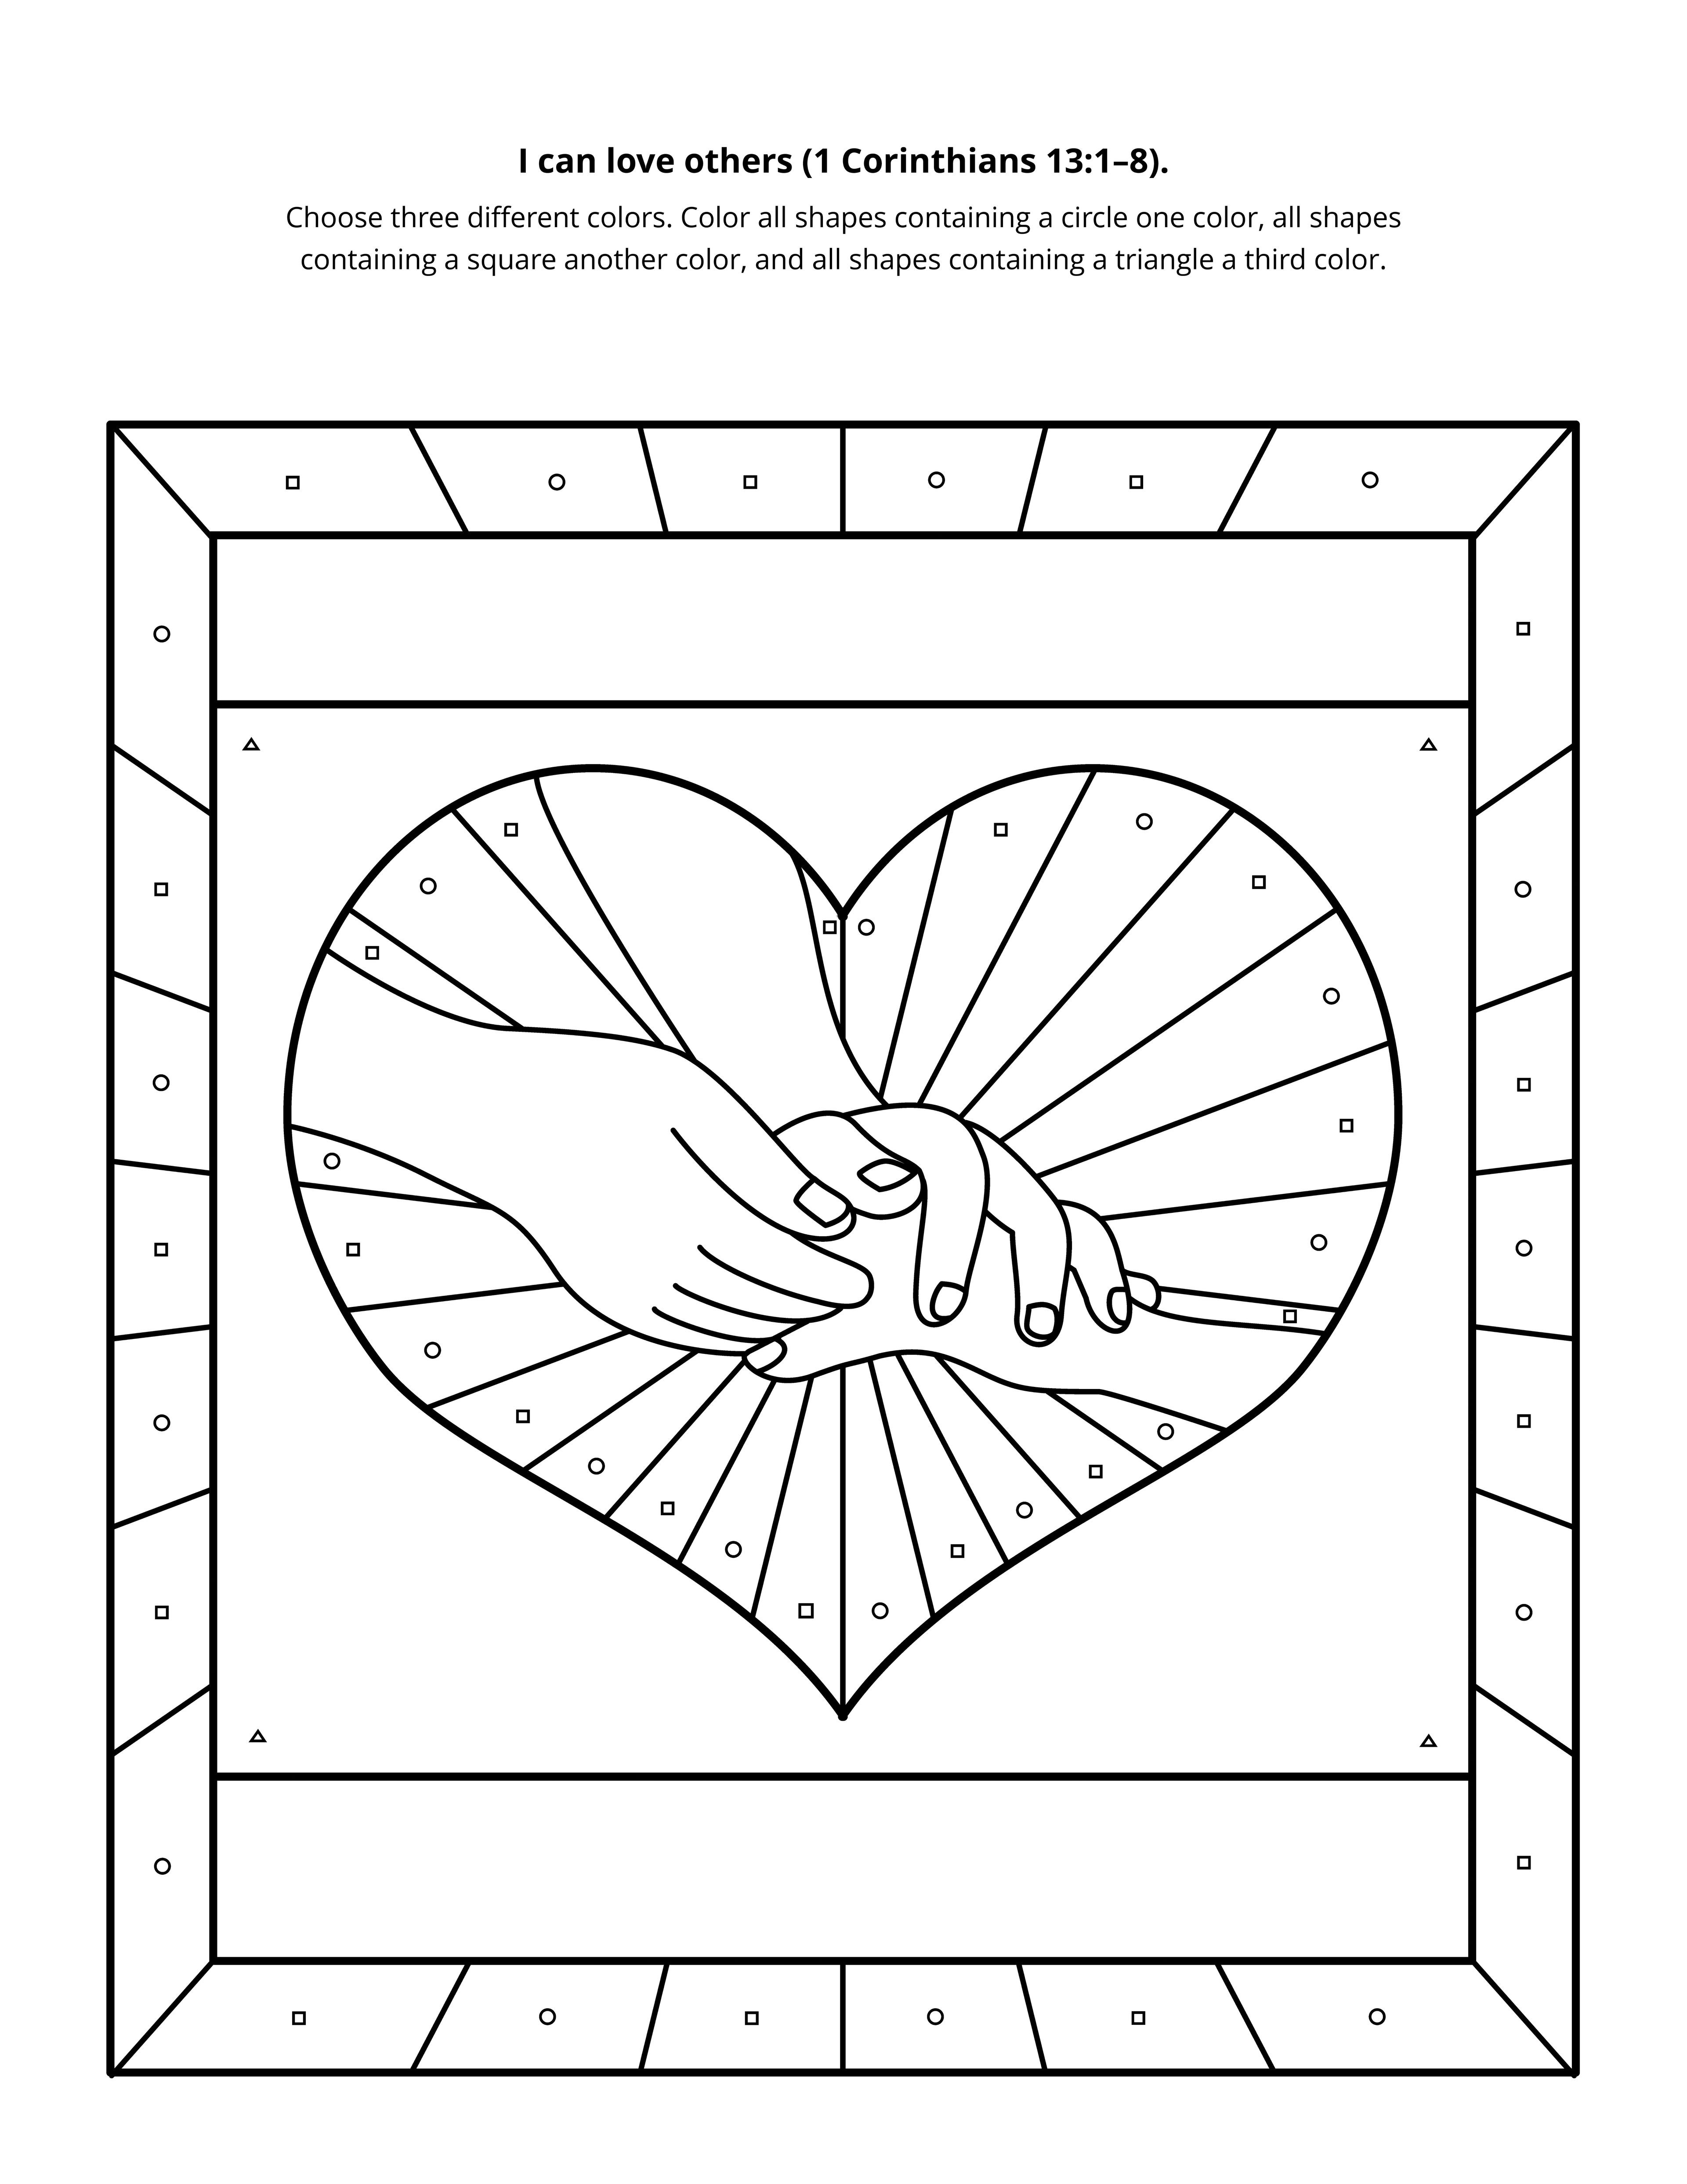 A line drawing of hands inside a heart.